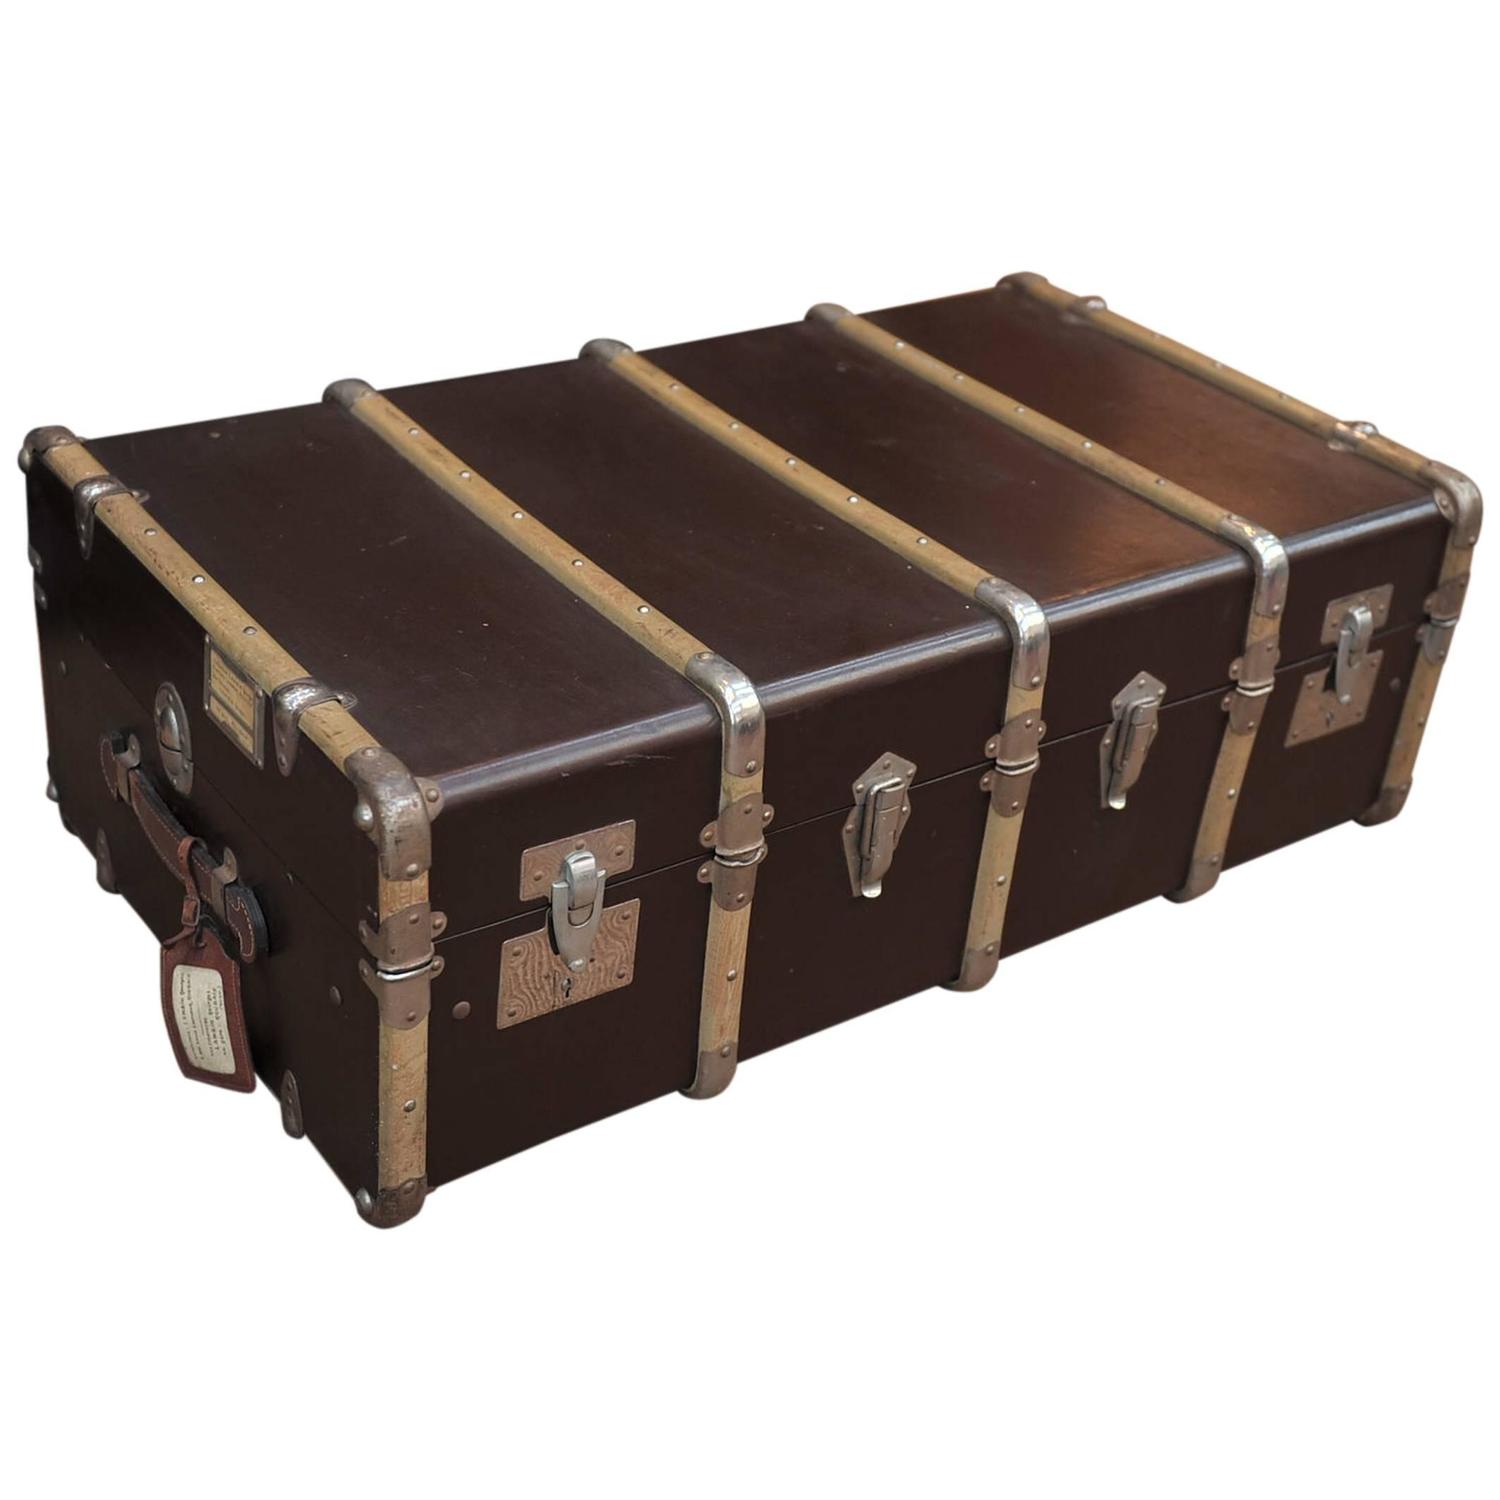 Vintage French Traveling Suitecase Trunk Luggage at 1stdibs